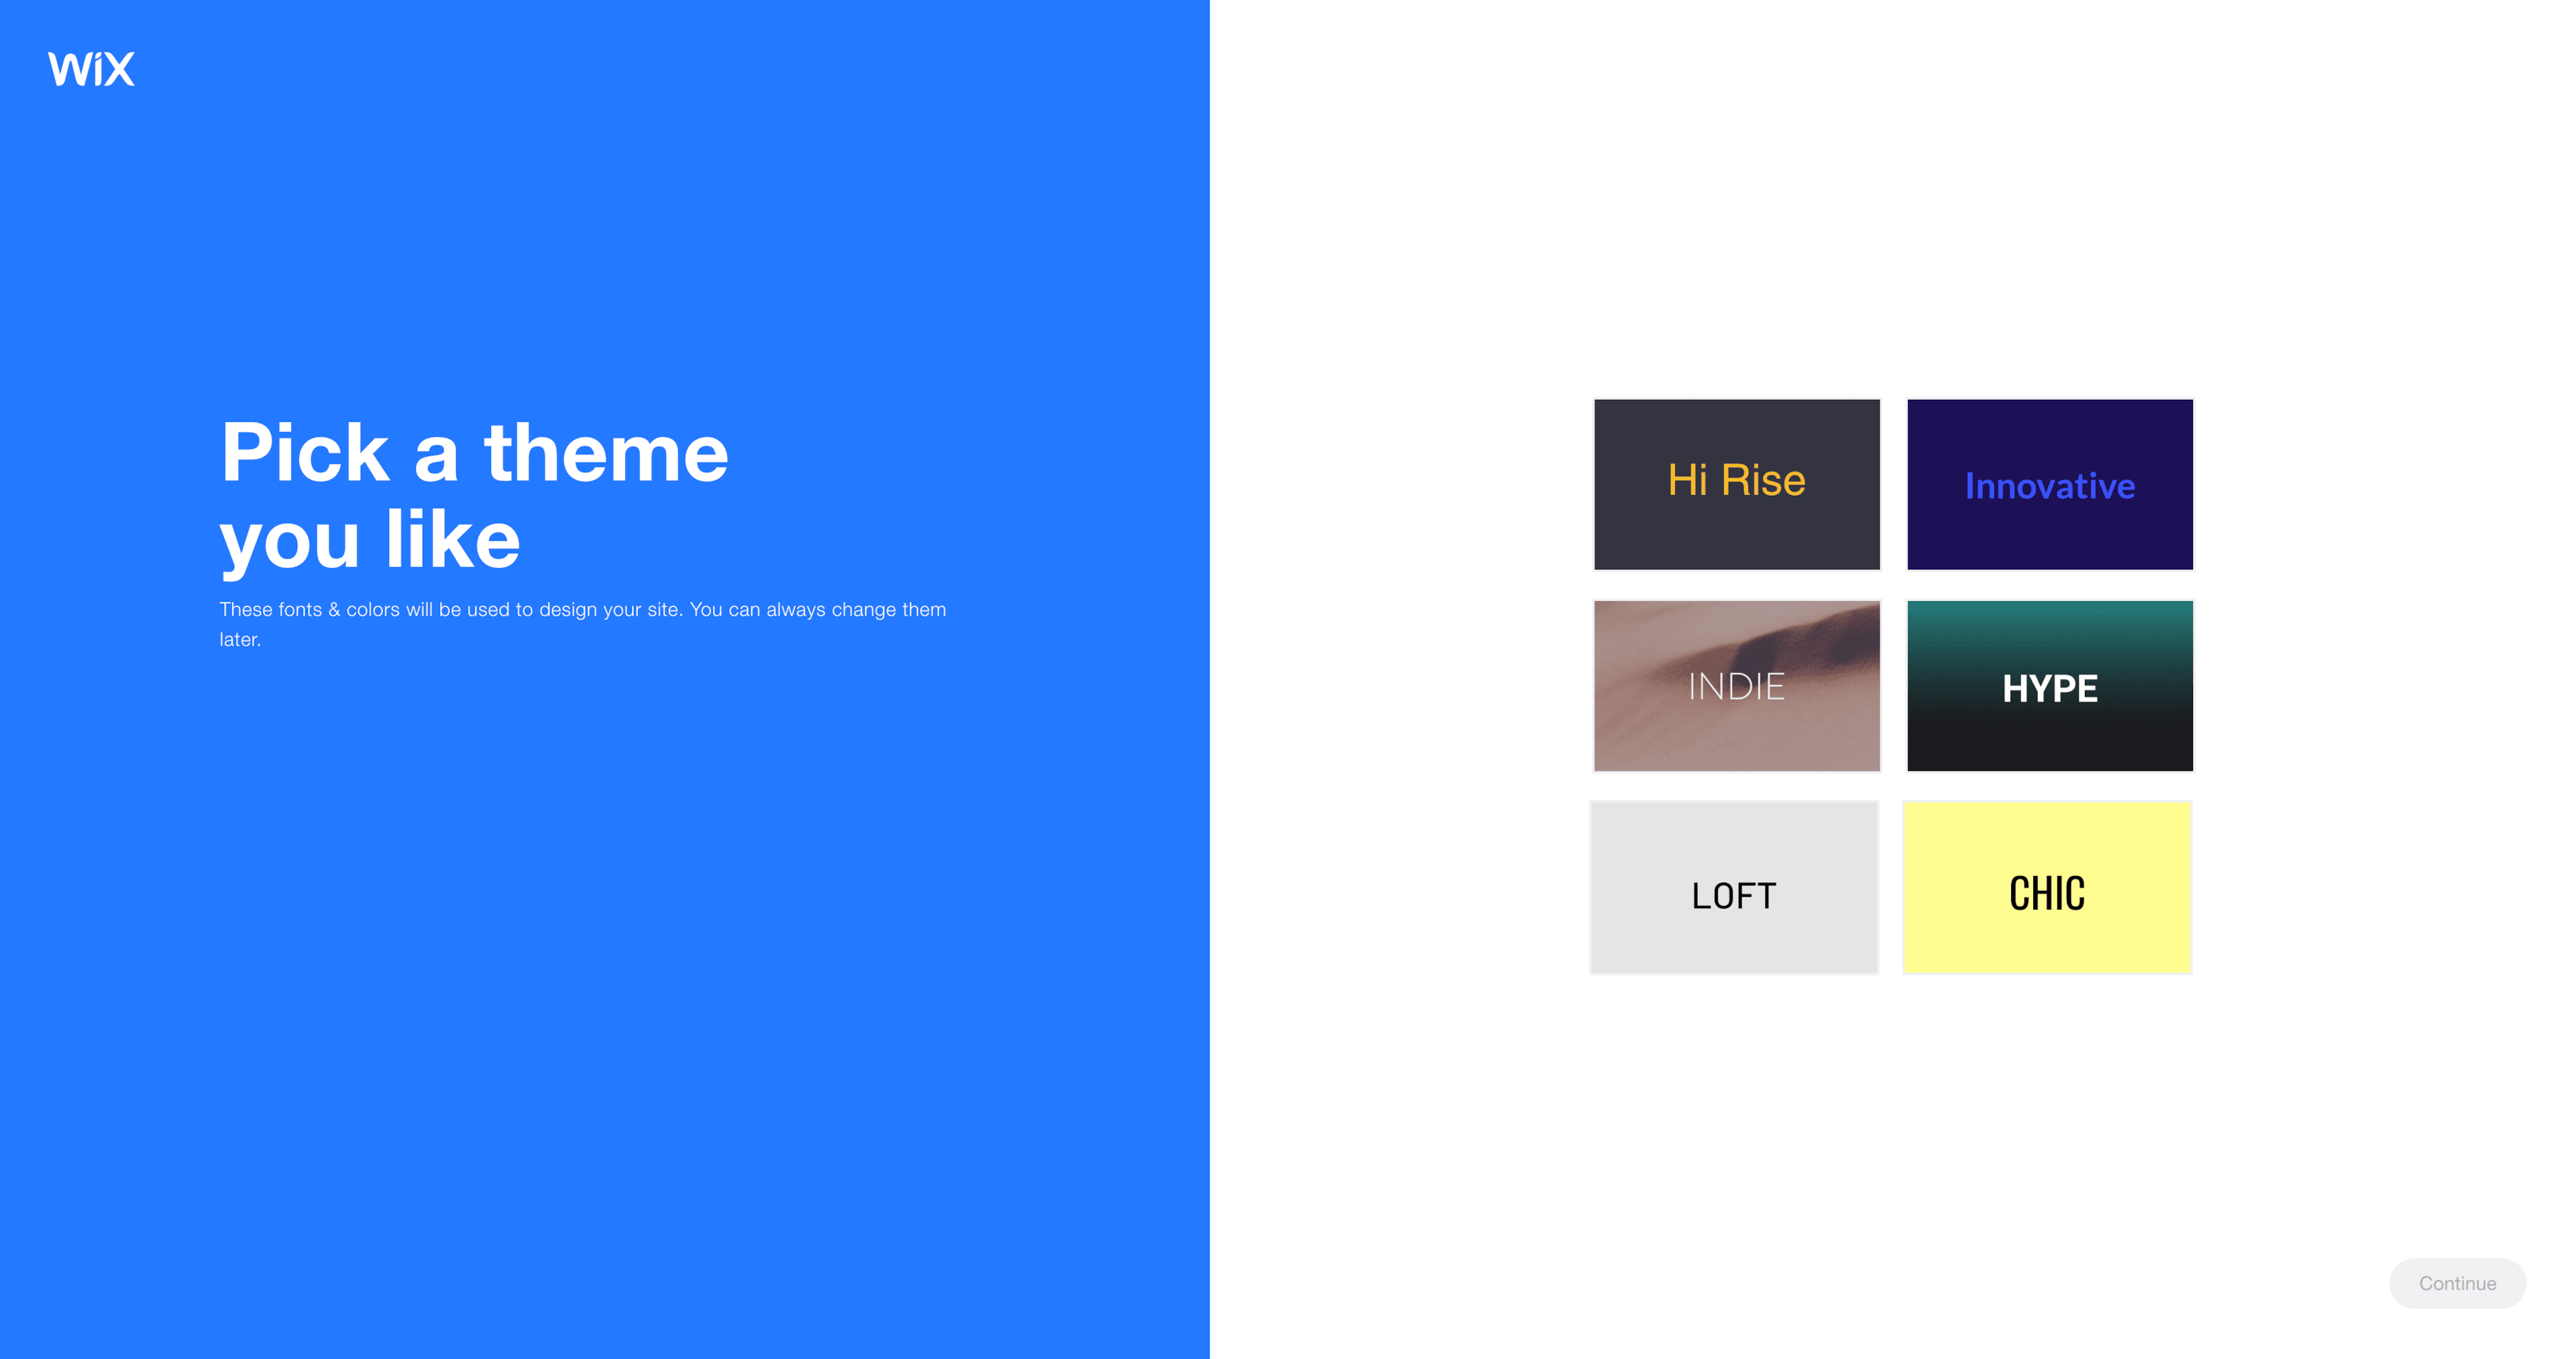 Wix ADI helping you decide on a theme for your site